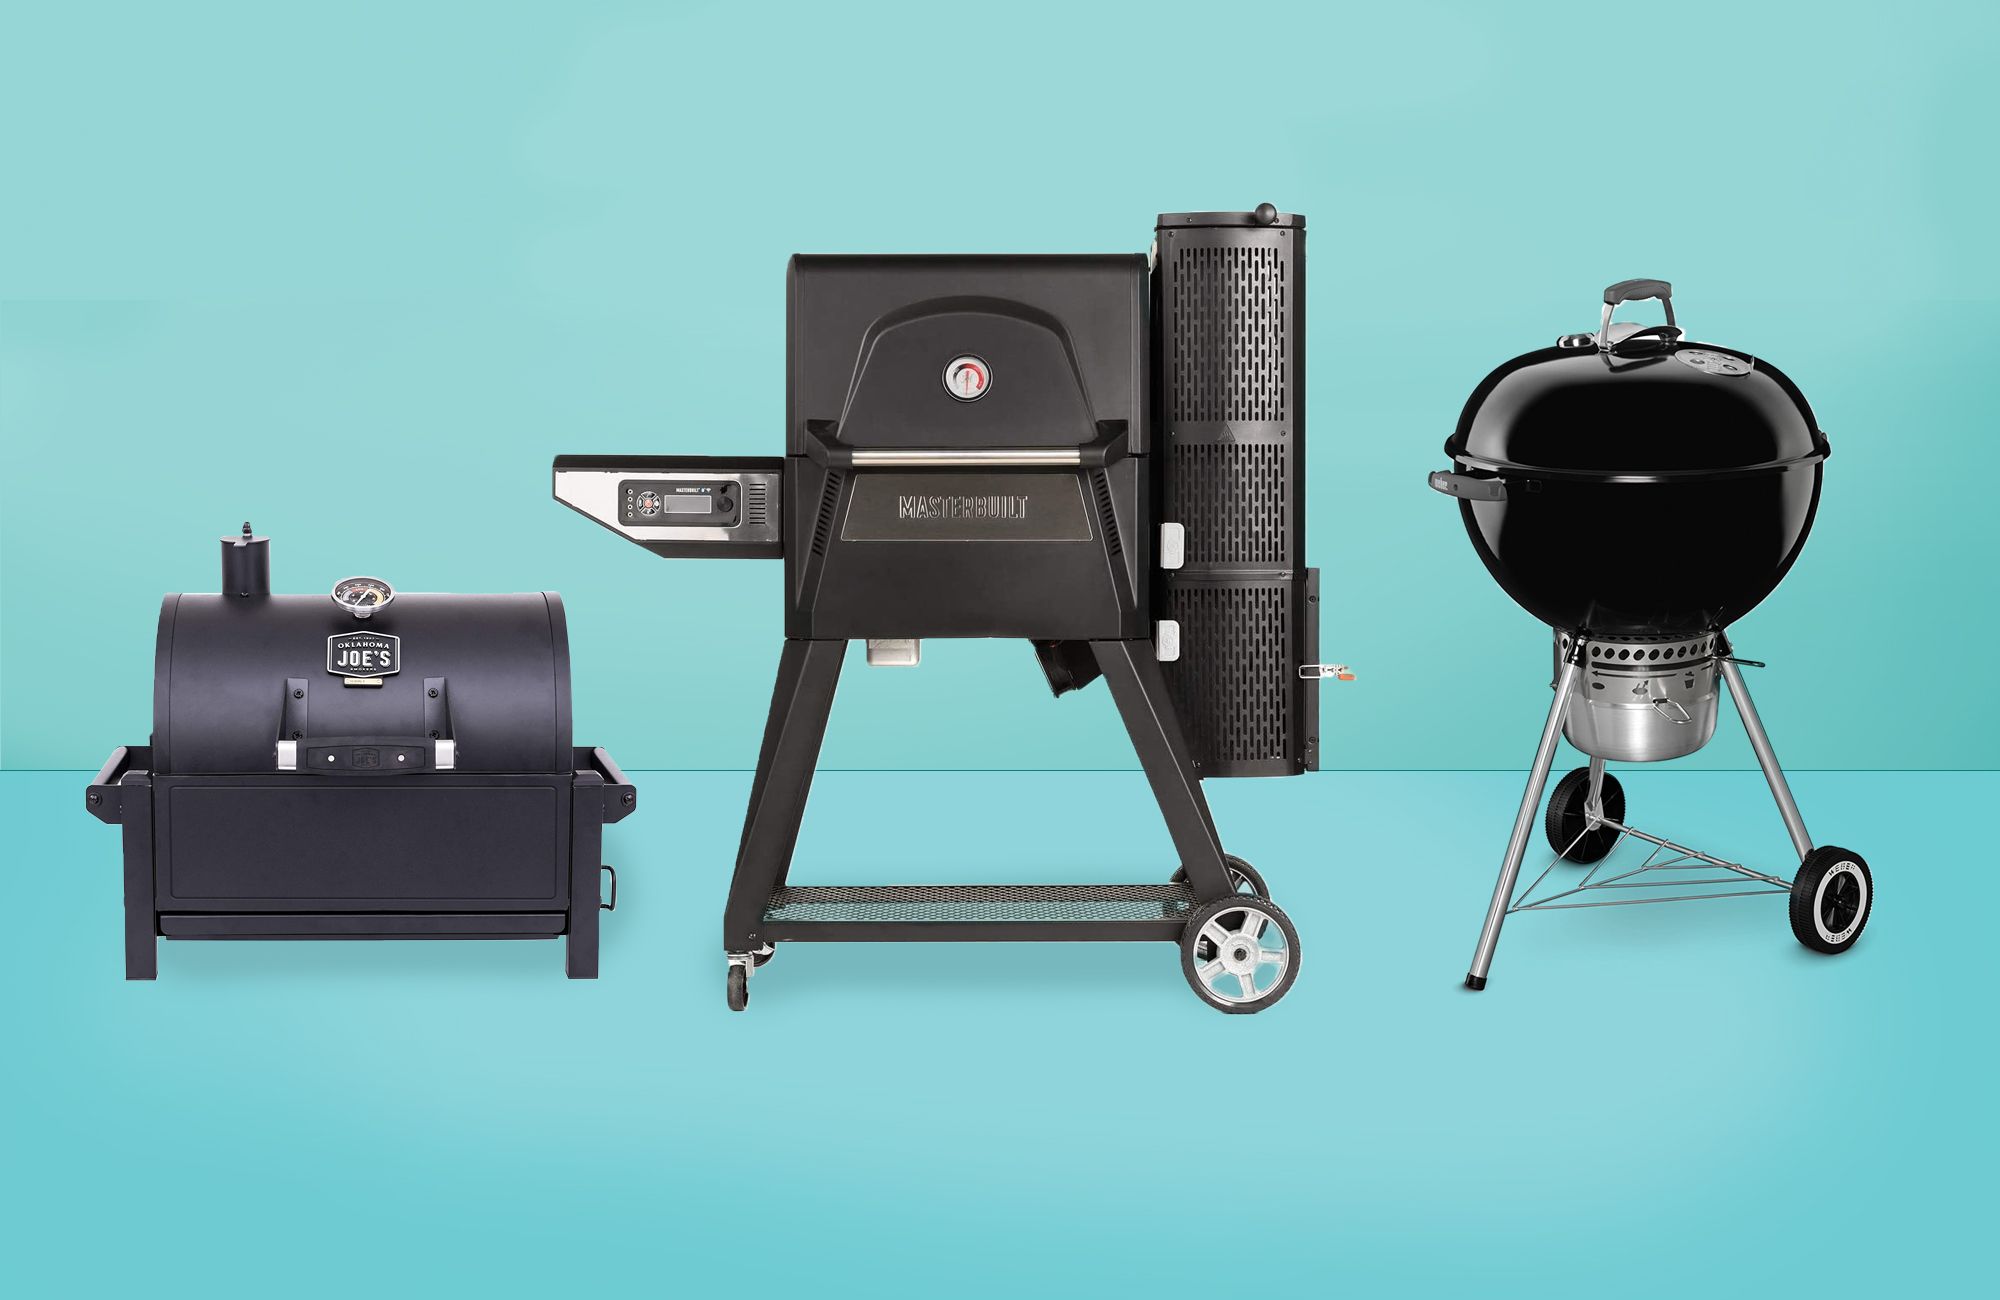 11 Grill and Smoker Accessories You Actually Need. No Fluff!!!